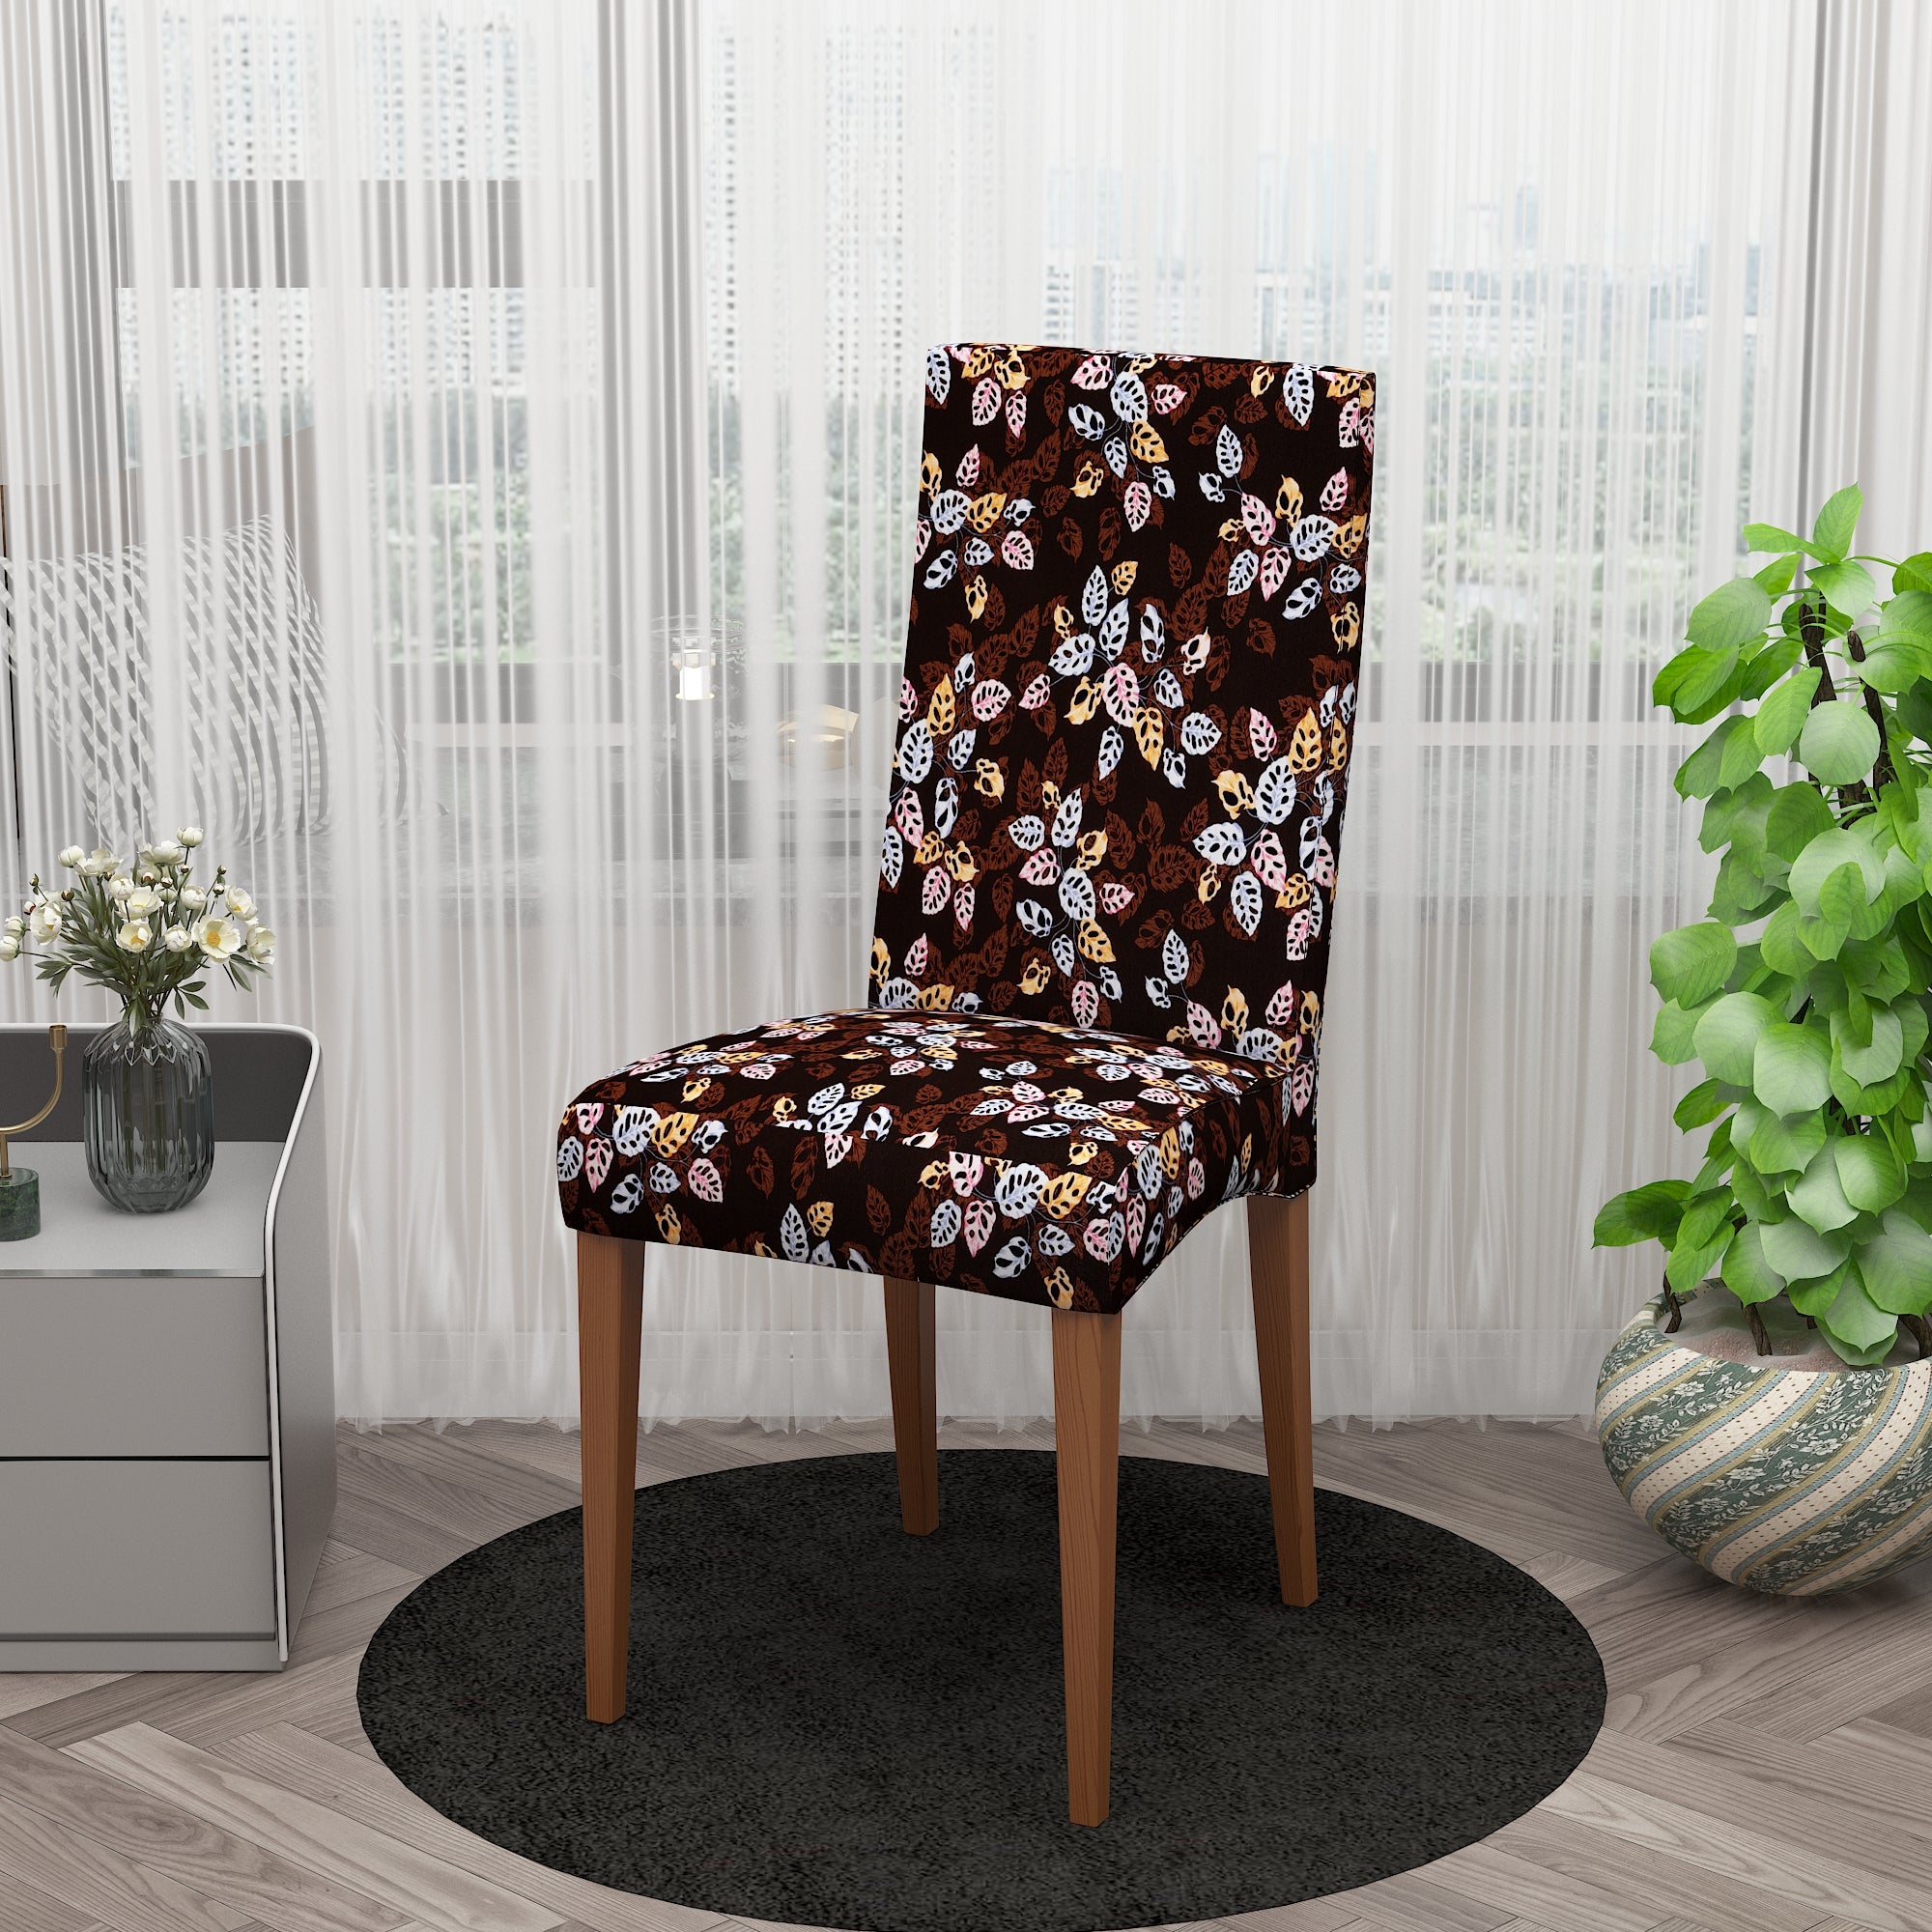 Polyester Spandex Stretchable Printed Chair Cover, MG02